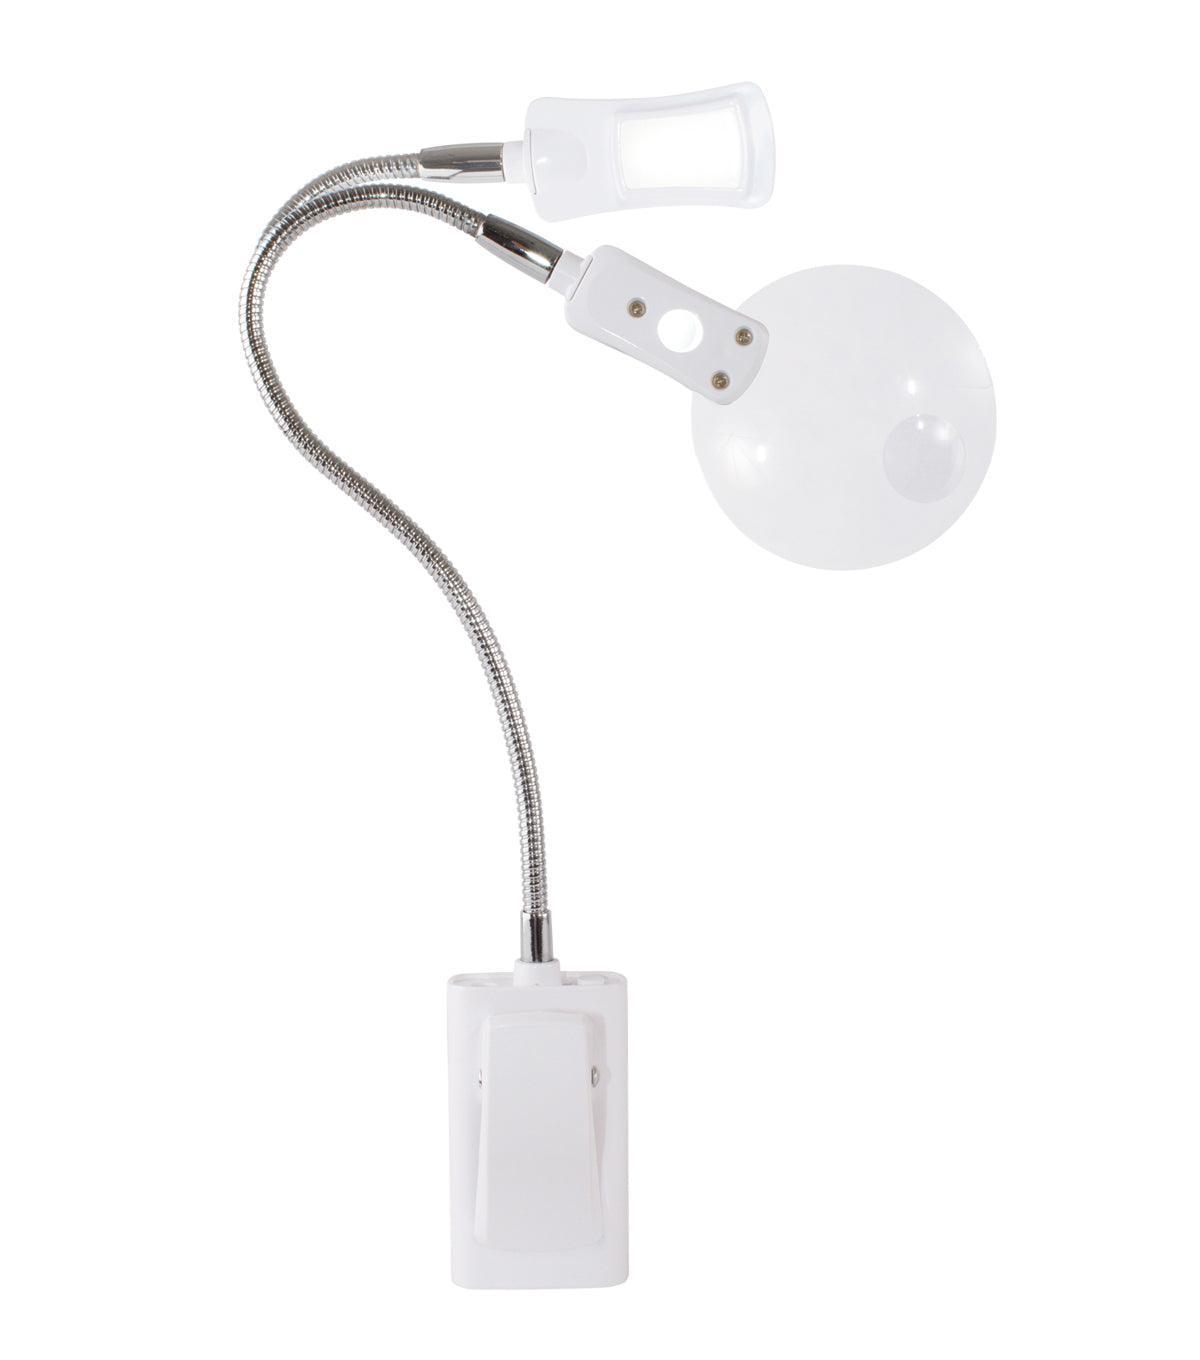 LED 2 in-1 Sewing Machine Light (Ott Light) - The Low Vision Store